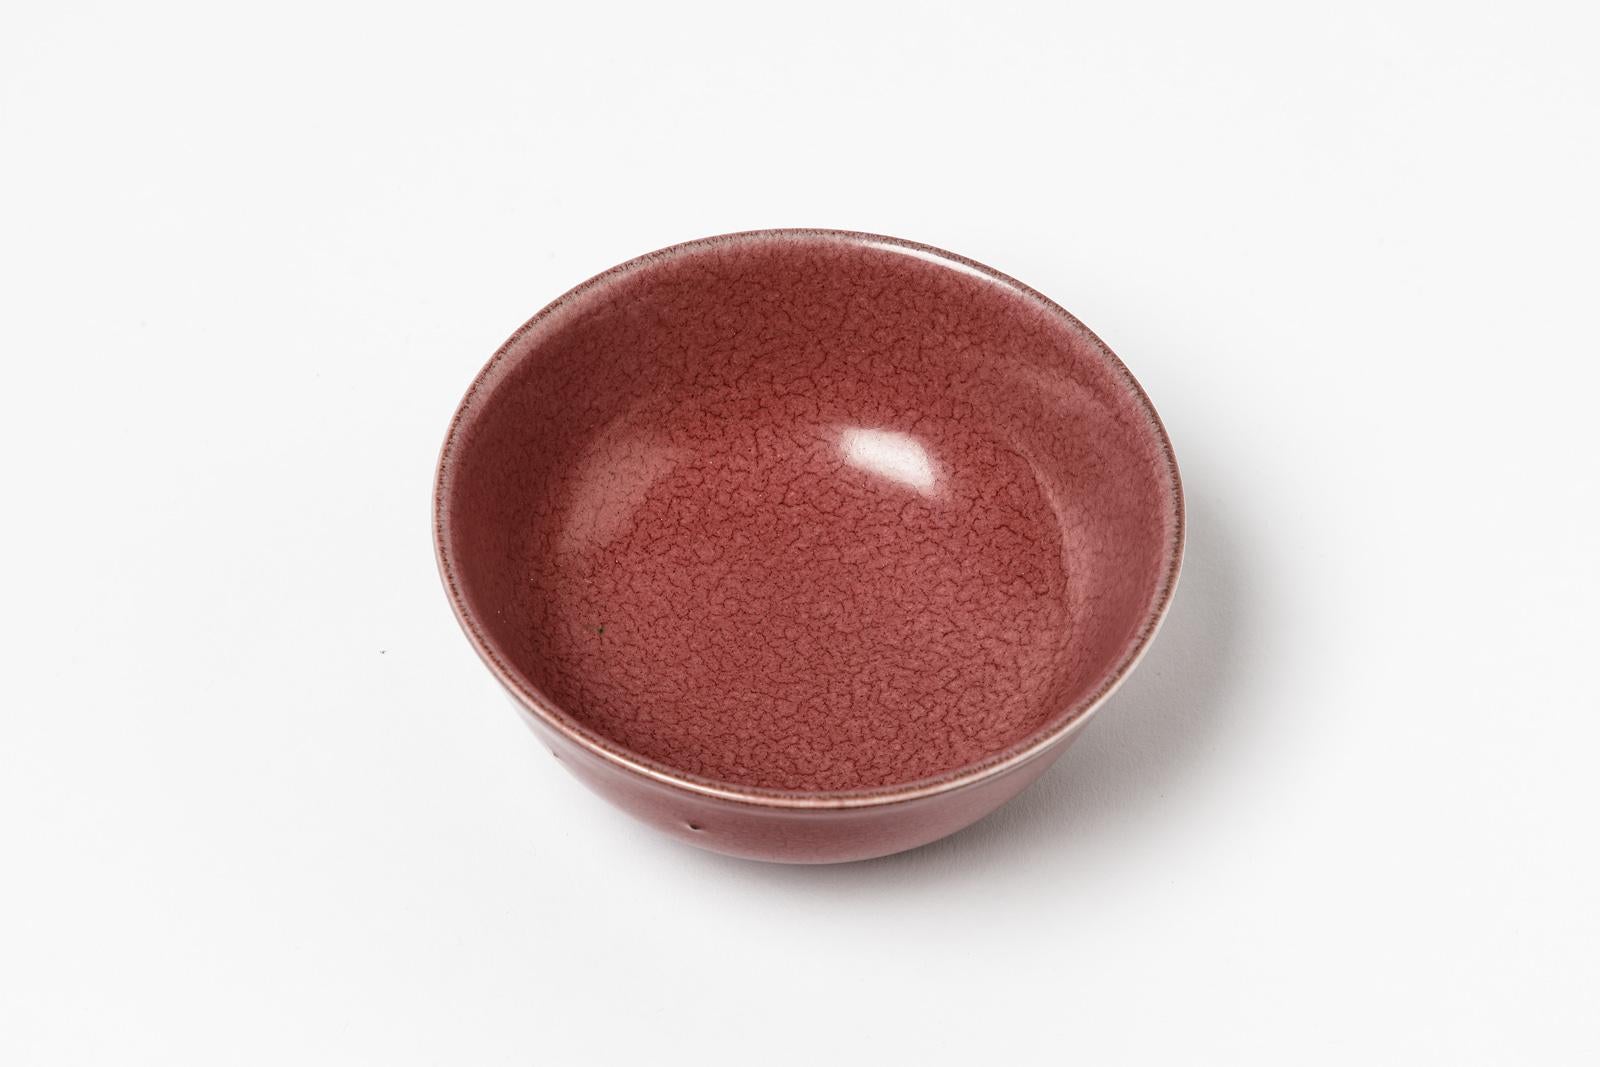 Modern Pink or Red Glazed Porcelain Ceramic Bowl or Cup by Marc Uzan, circa 2010 For Sale